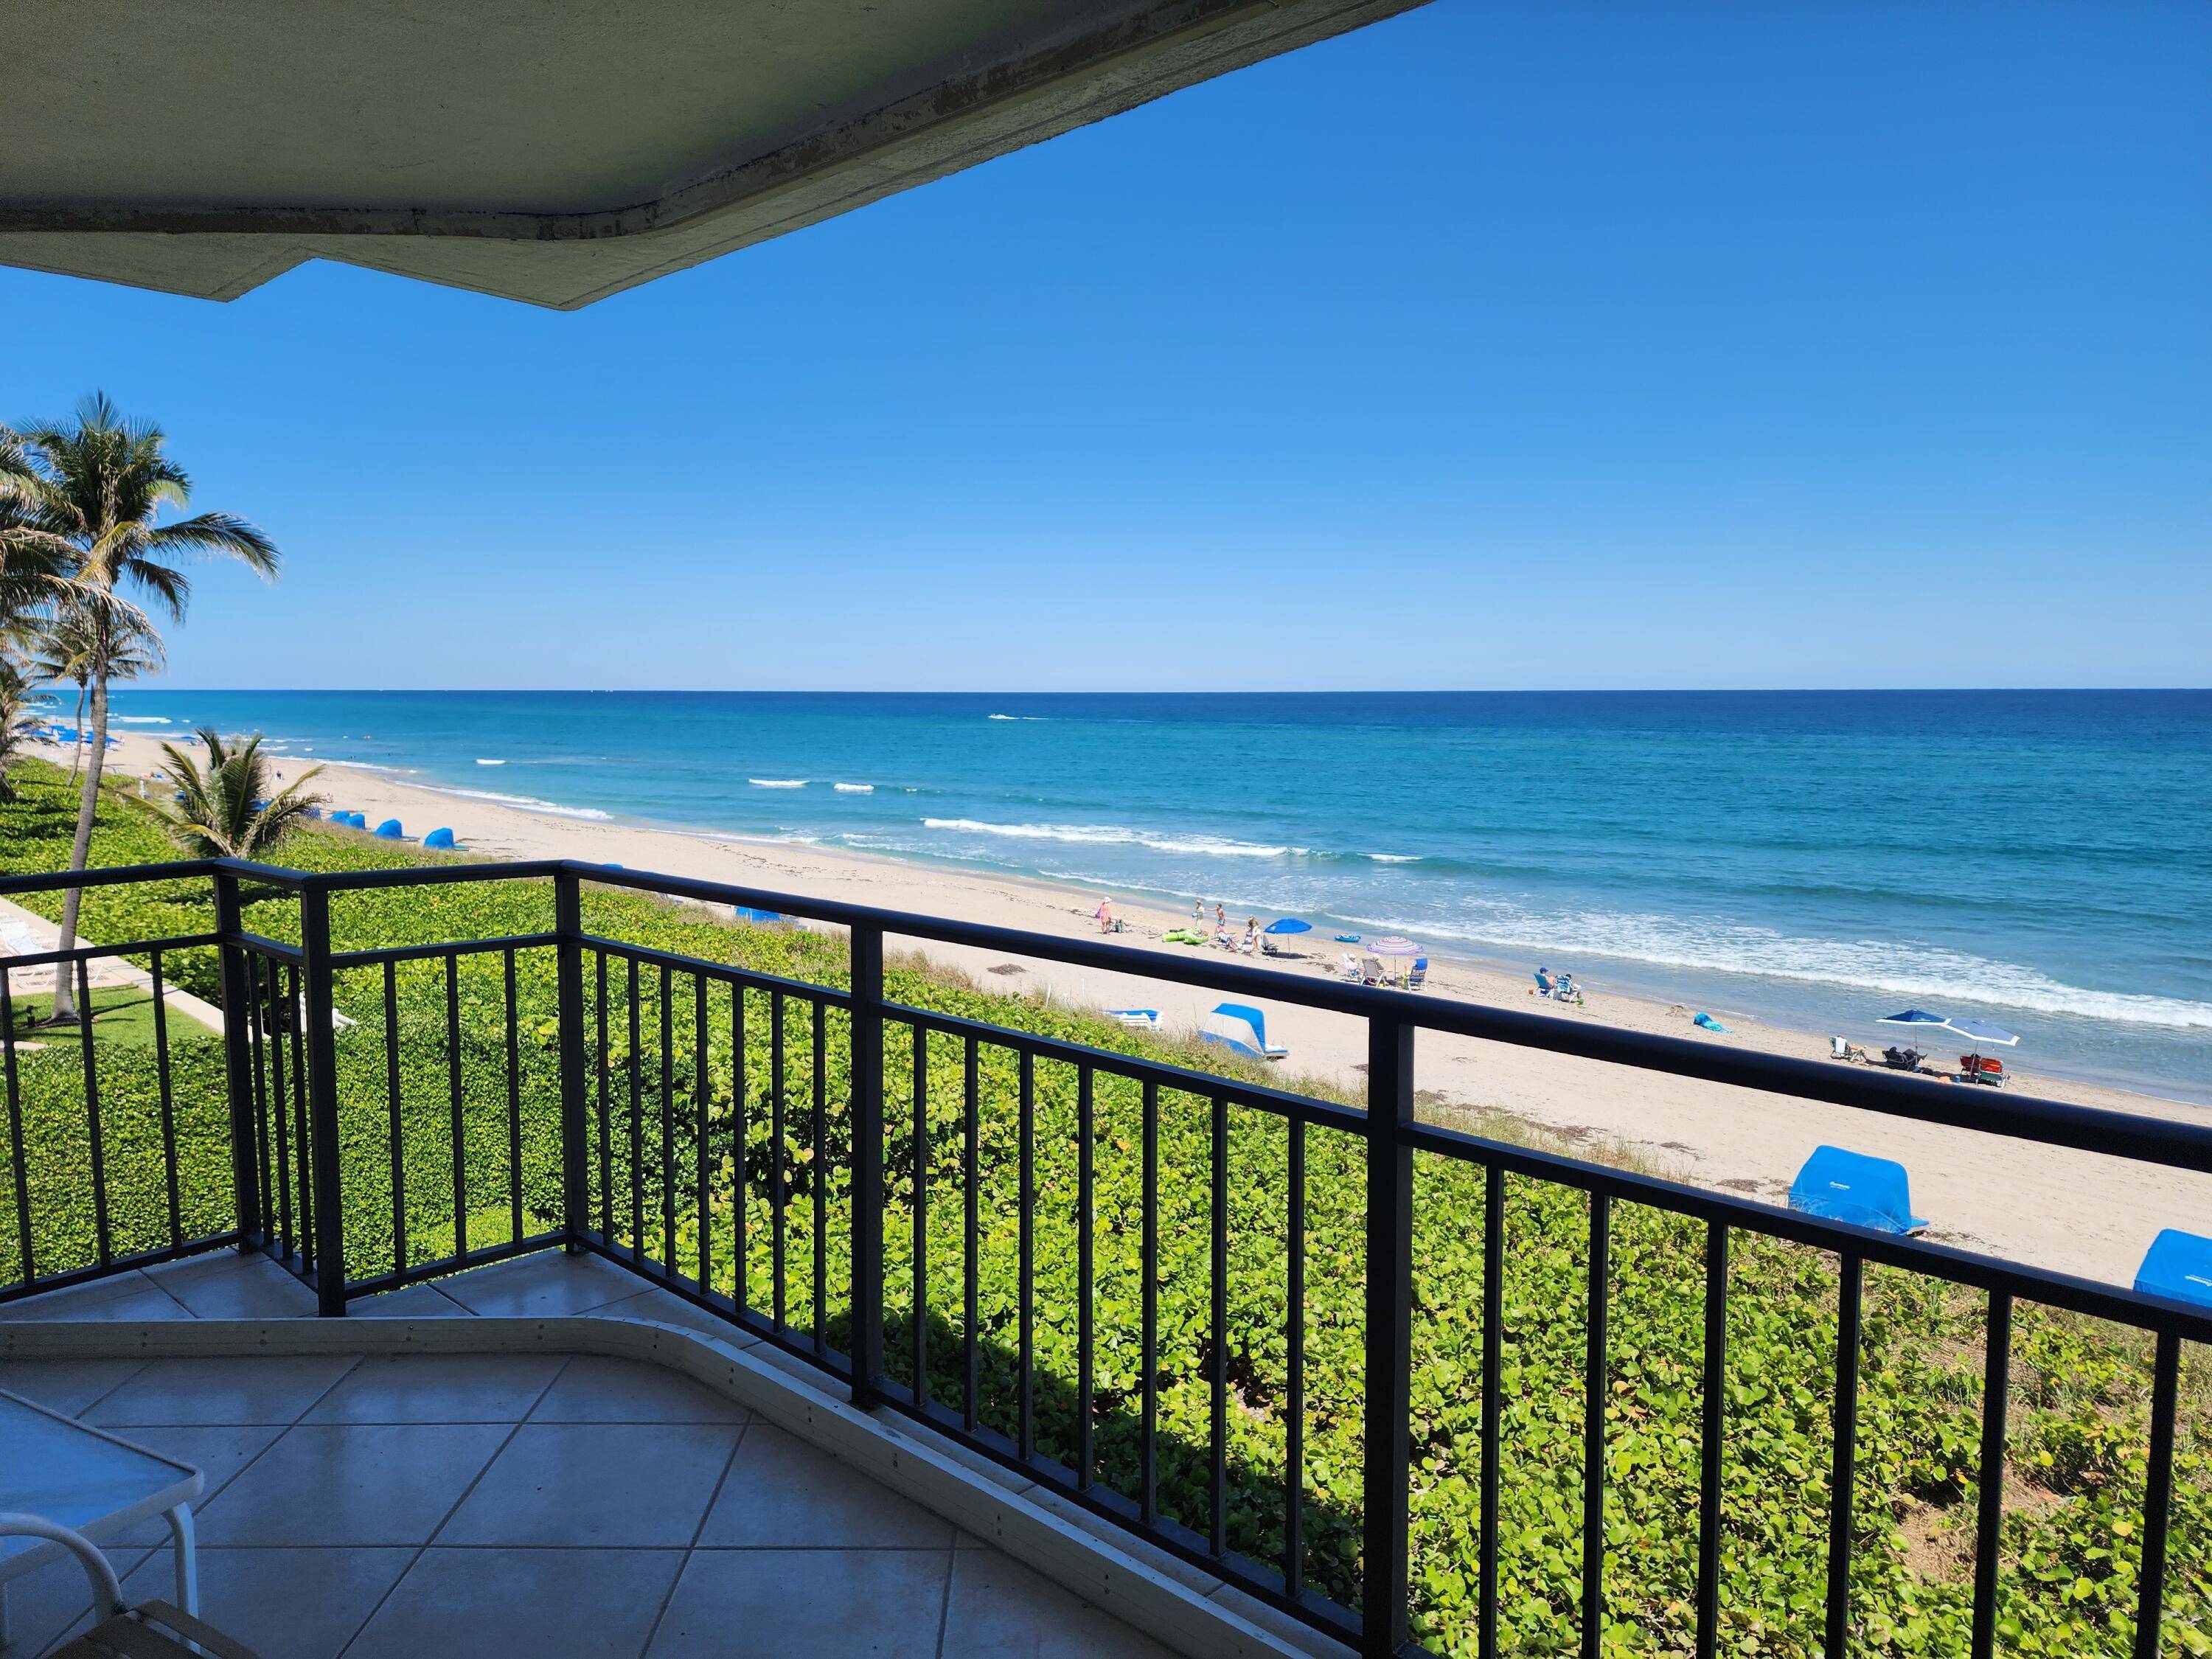 This beautiful 2 bedroom 2 bath unit has amazing floor to ceiling impact windows giving the most spectacular views from all living spaces of the Atlantic ocean.